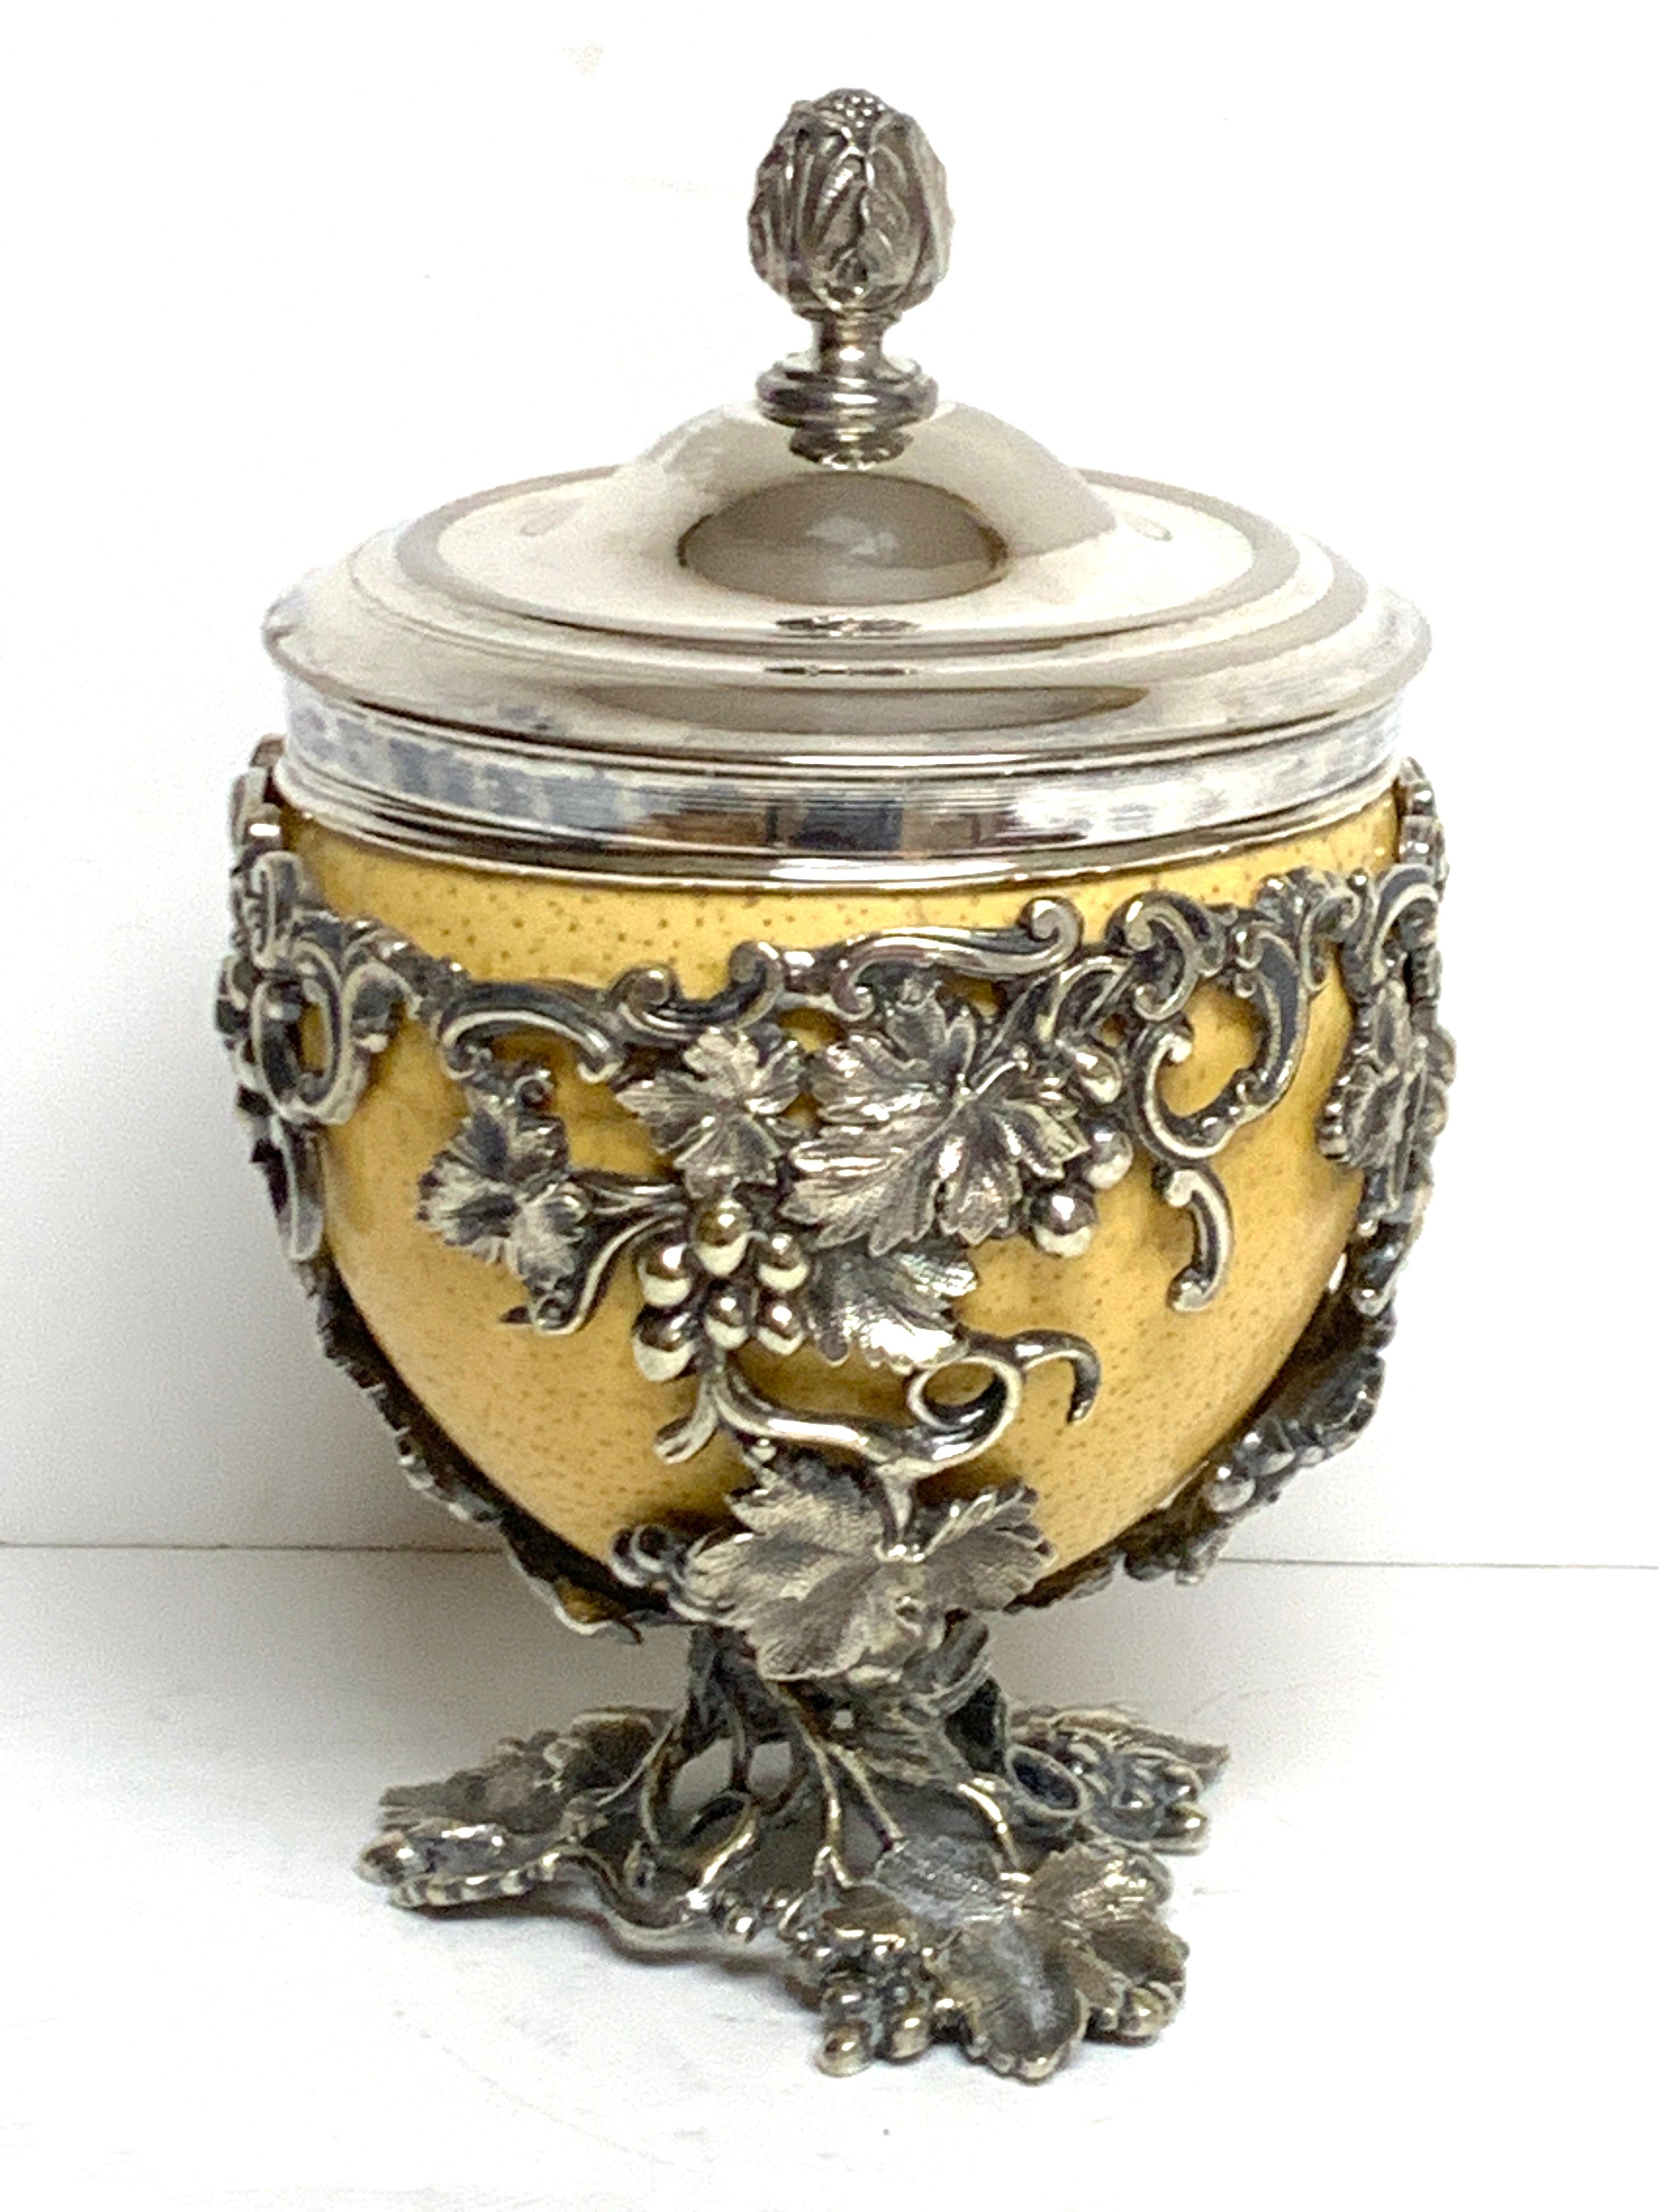 19th century English silver plated ostrich egg box, attributed to Elkington & Co.
In three parts, the silver plated lid with Acanthus leaf handle, the silver rimed egg, and the grape leaf encrusted holder, unmarked.